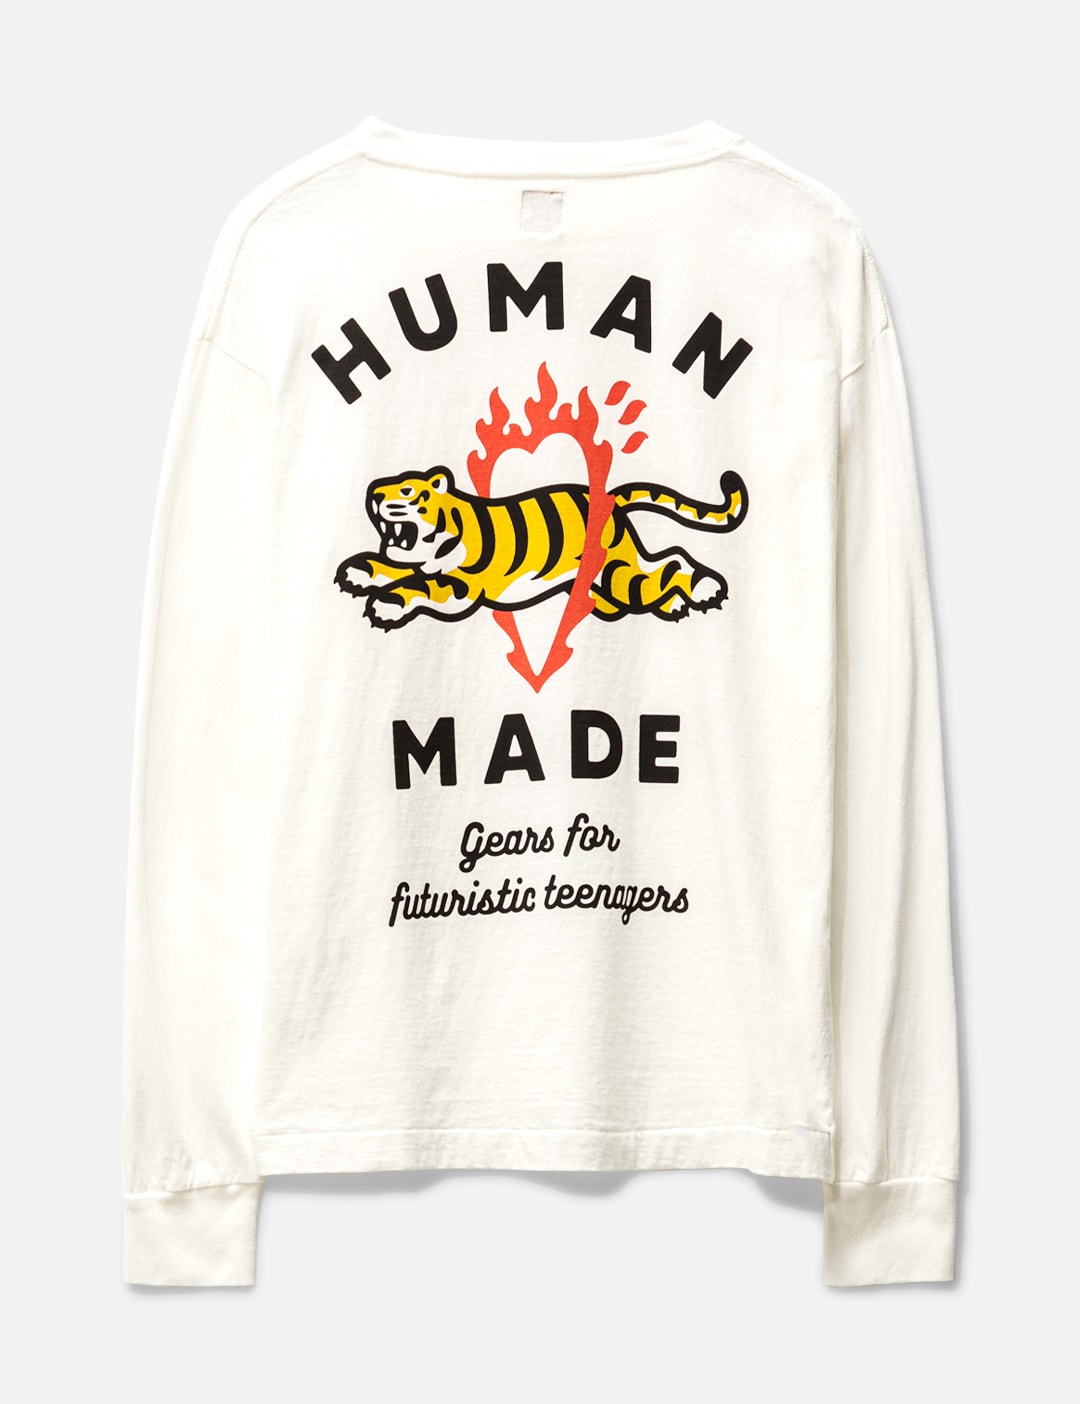 Human Made - Human Made x Beatles T-shirt  HBX - Globally Curated Fashion  and Lifestyle by Hypebeast